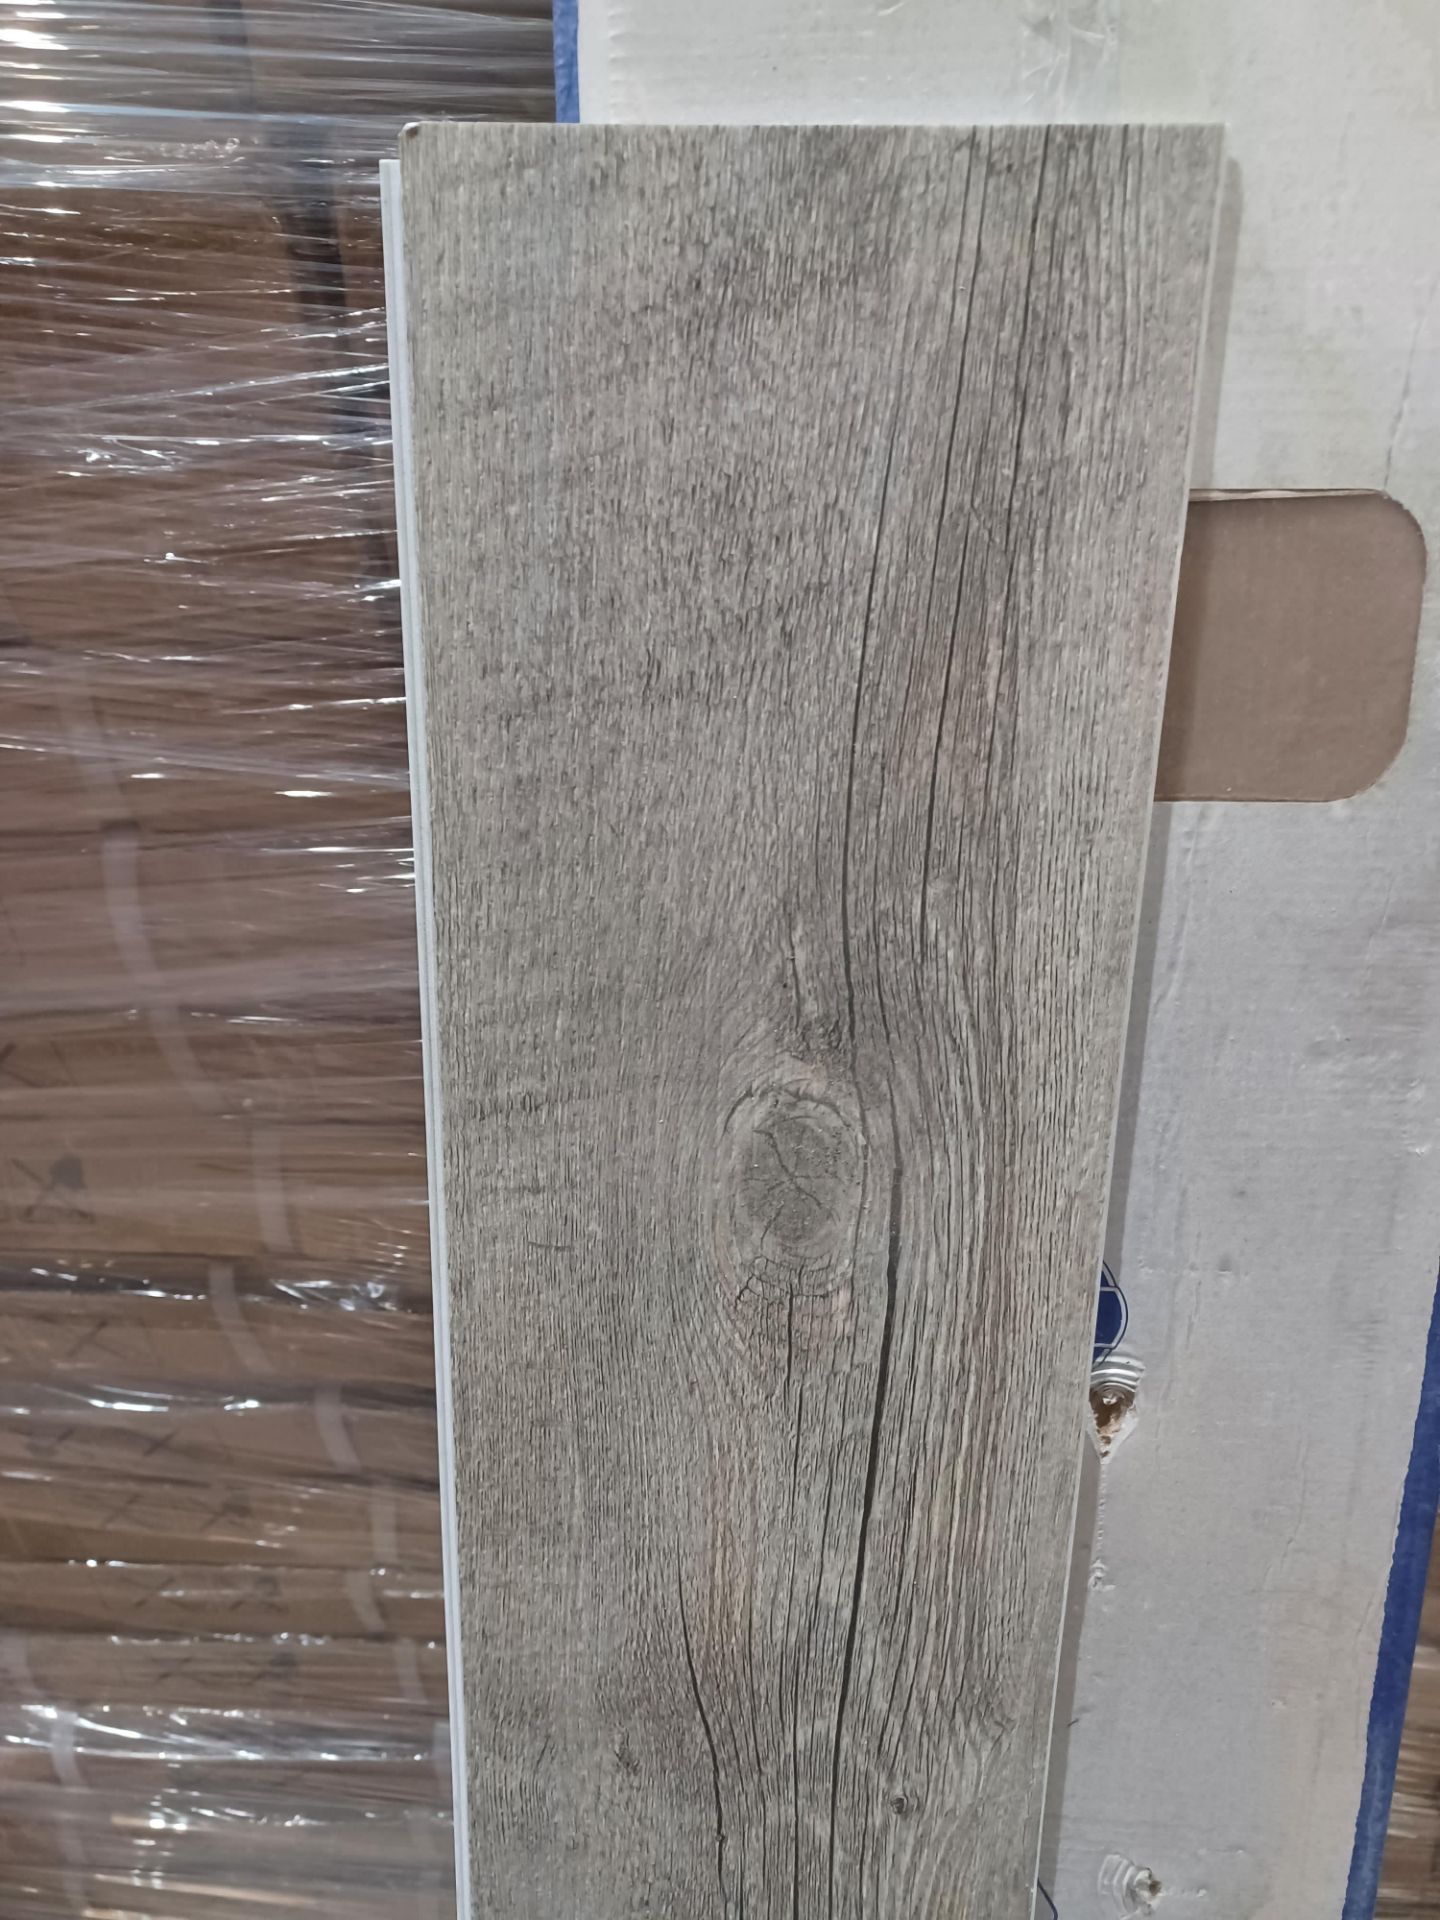 2 X PACKS OF BAILA VINYL CLICK PLANK. DISTRESSED OAK GREY BROWN. EACH PACK CONTAINS 2.2m2, GIVING - Image 2 of 2